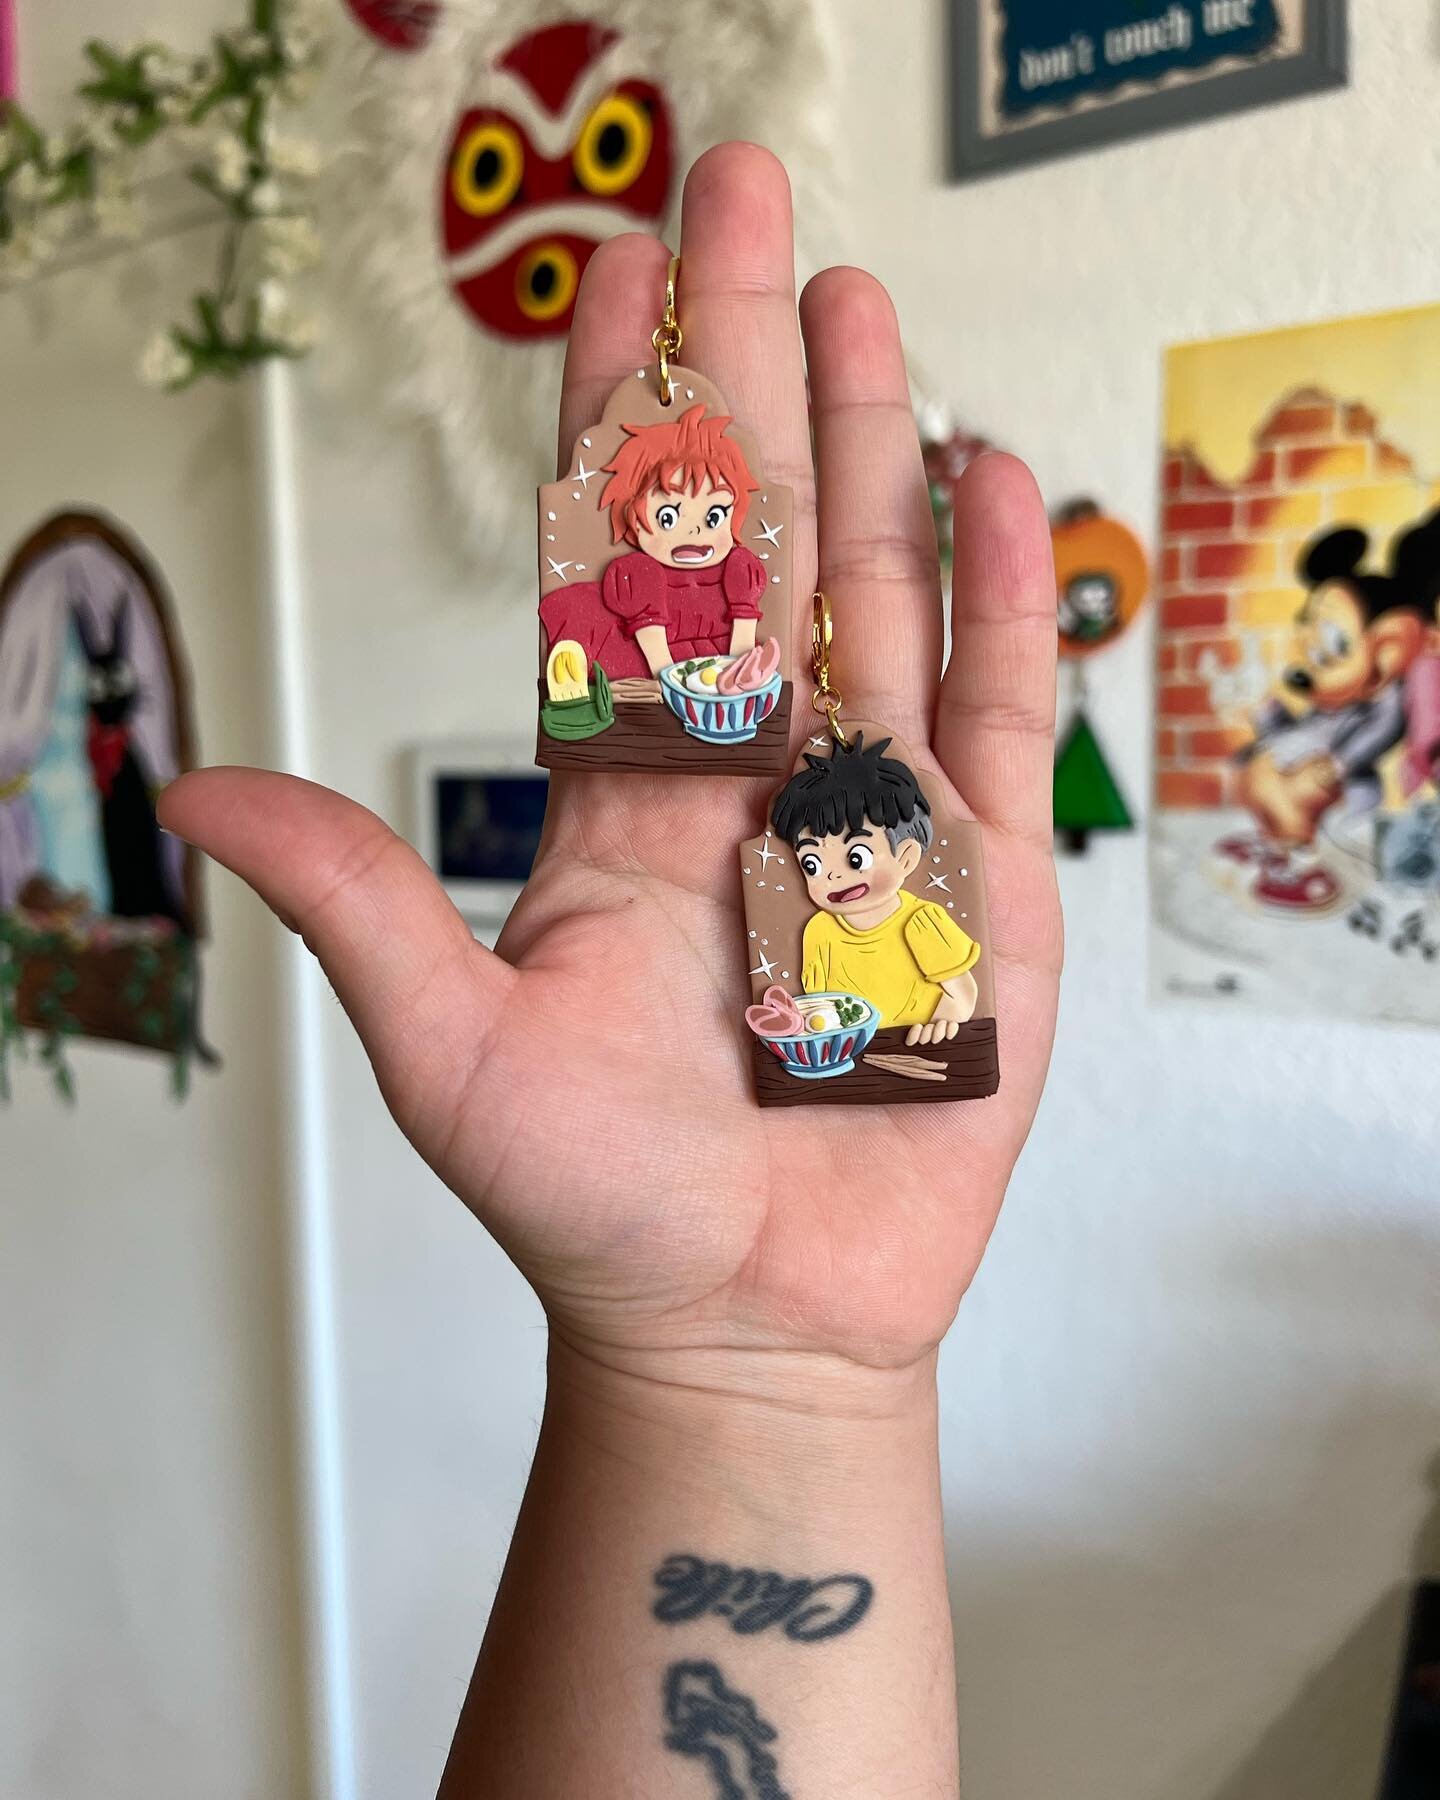 &ldquo;Mmmm it&rsquo;s ham!!!&rdquo; 

This scene is so wholesome and cute and makes me happy! 

This one of a kind pair of earrings will be available 8/19 @ 2pm PST!

#ponyo #ponyoonthecliffbythesea #ramen #ooakearrings #oneofakindjewelry #oneofakin